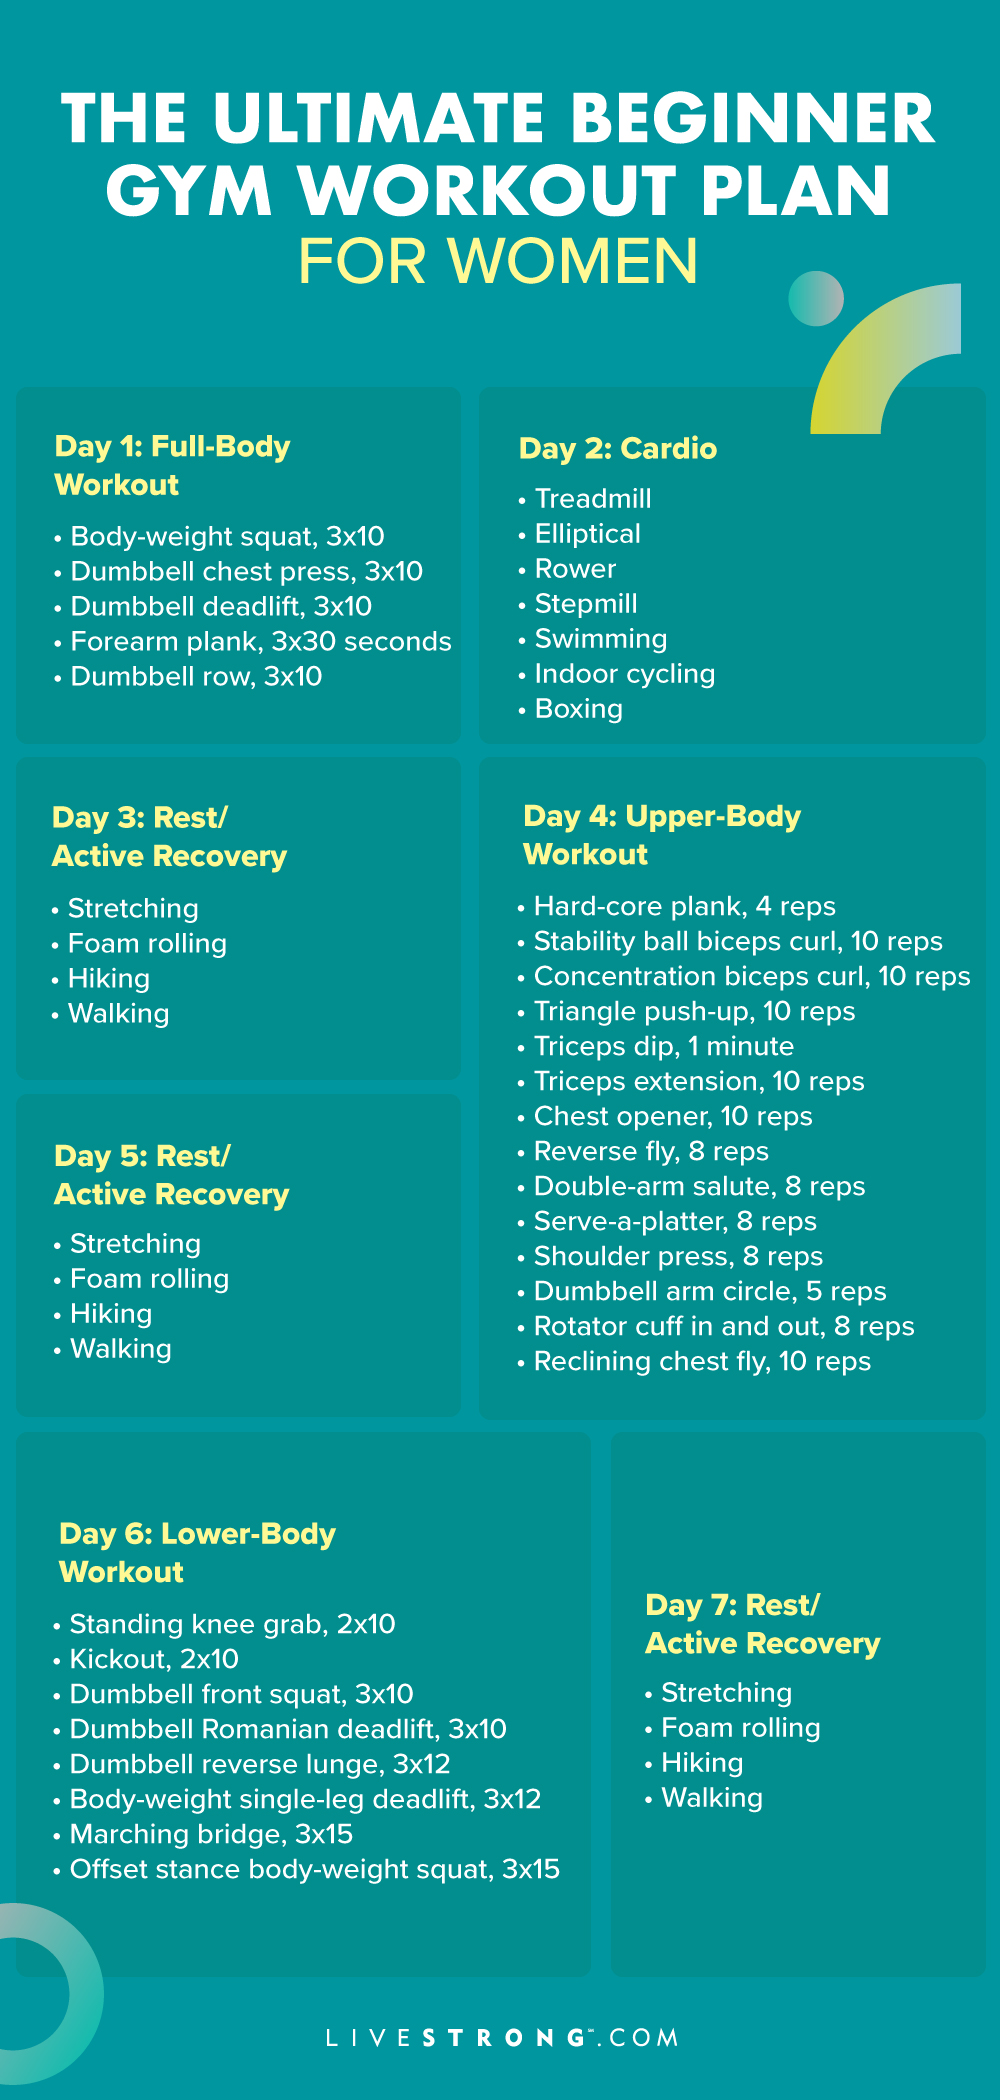 Beginner Gym Workout Plan For Women: How To Schedule Your Routine |  Livestrong